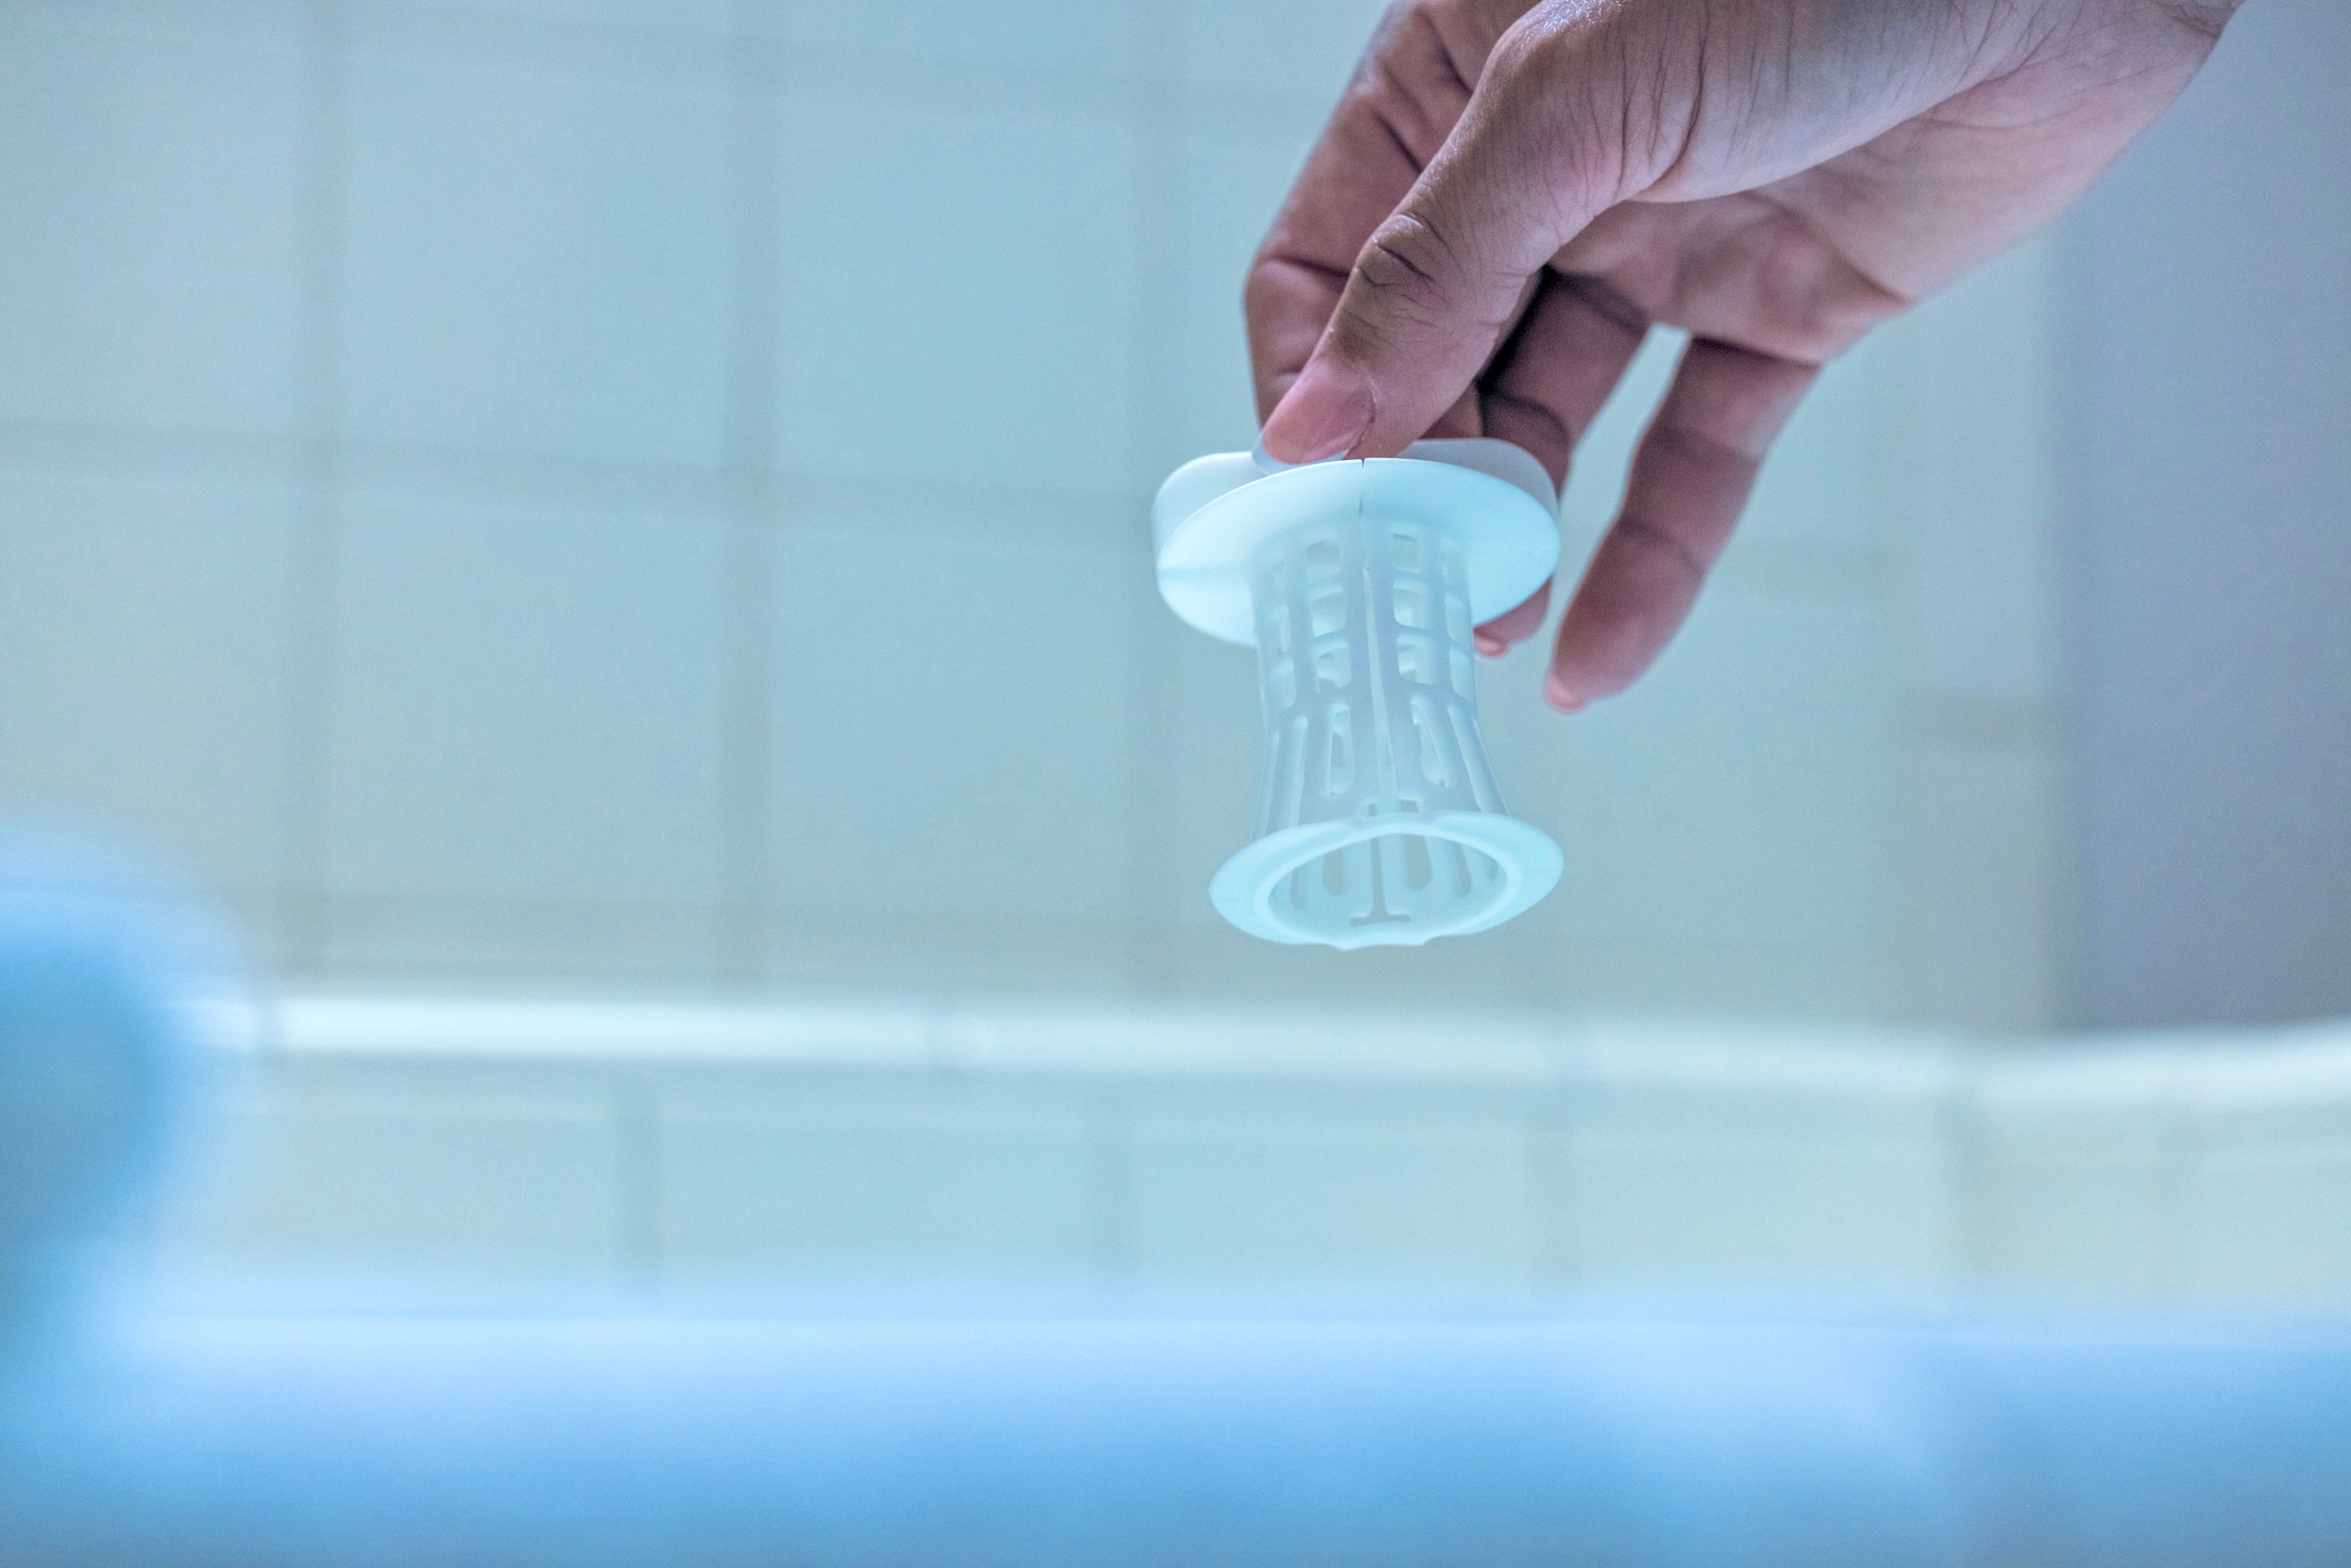 This shower hair catcher from TikTok will keep your drain clean